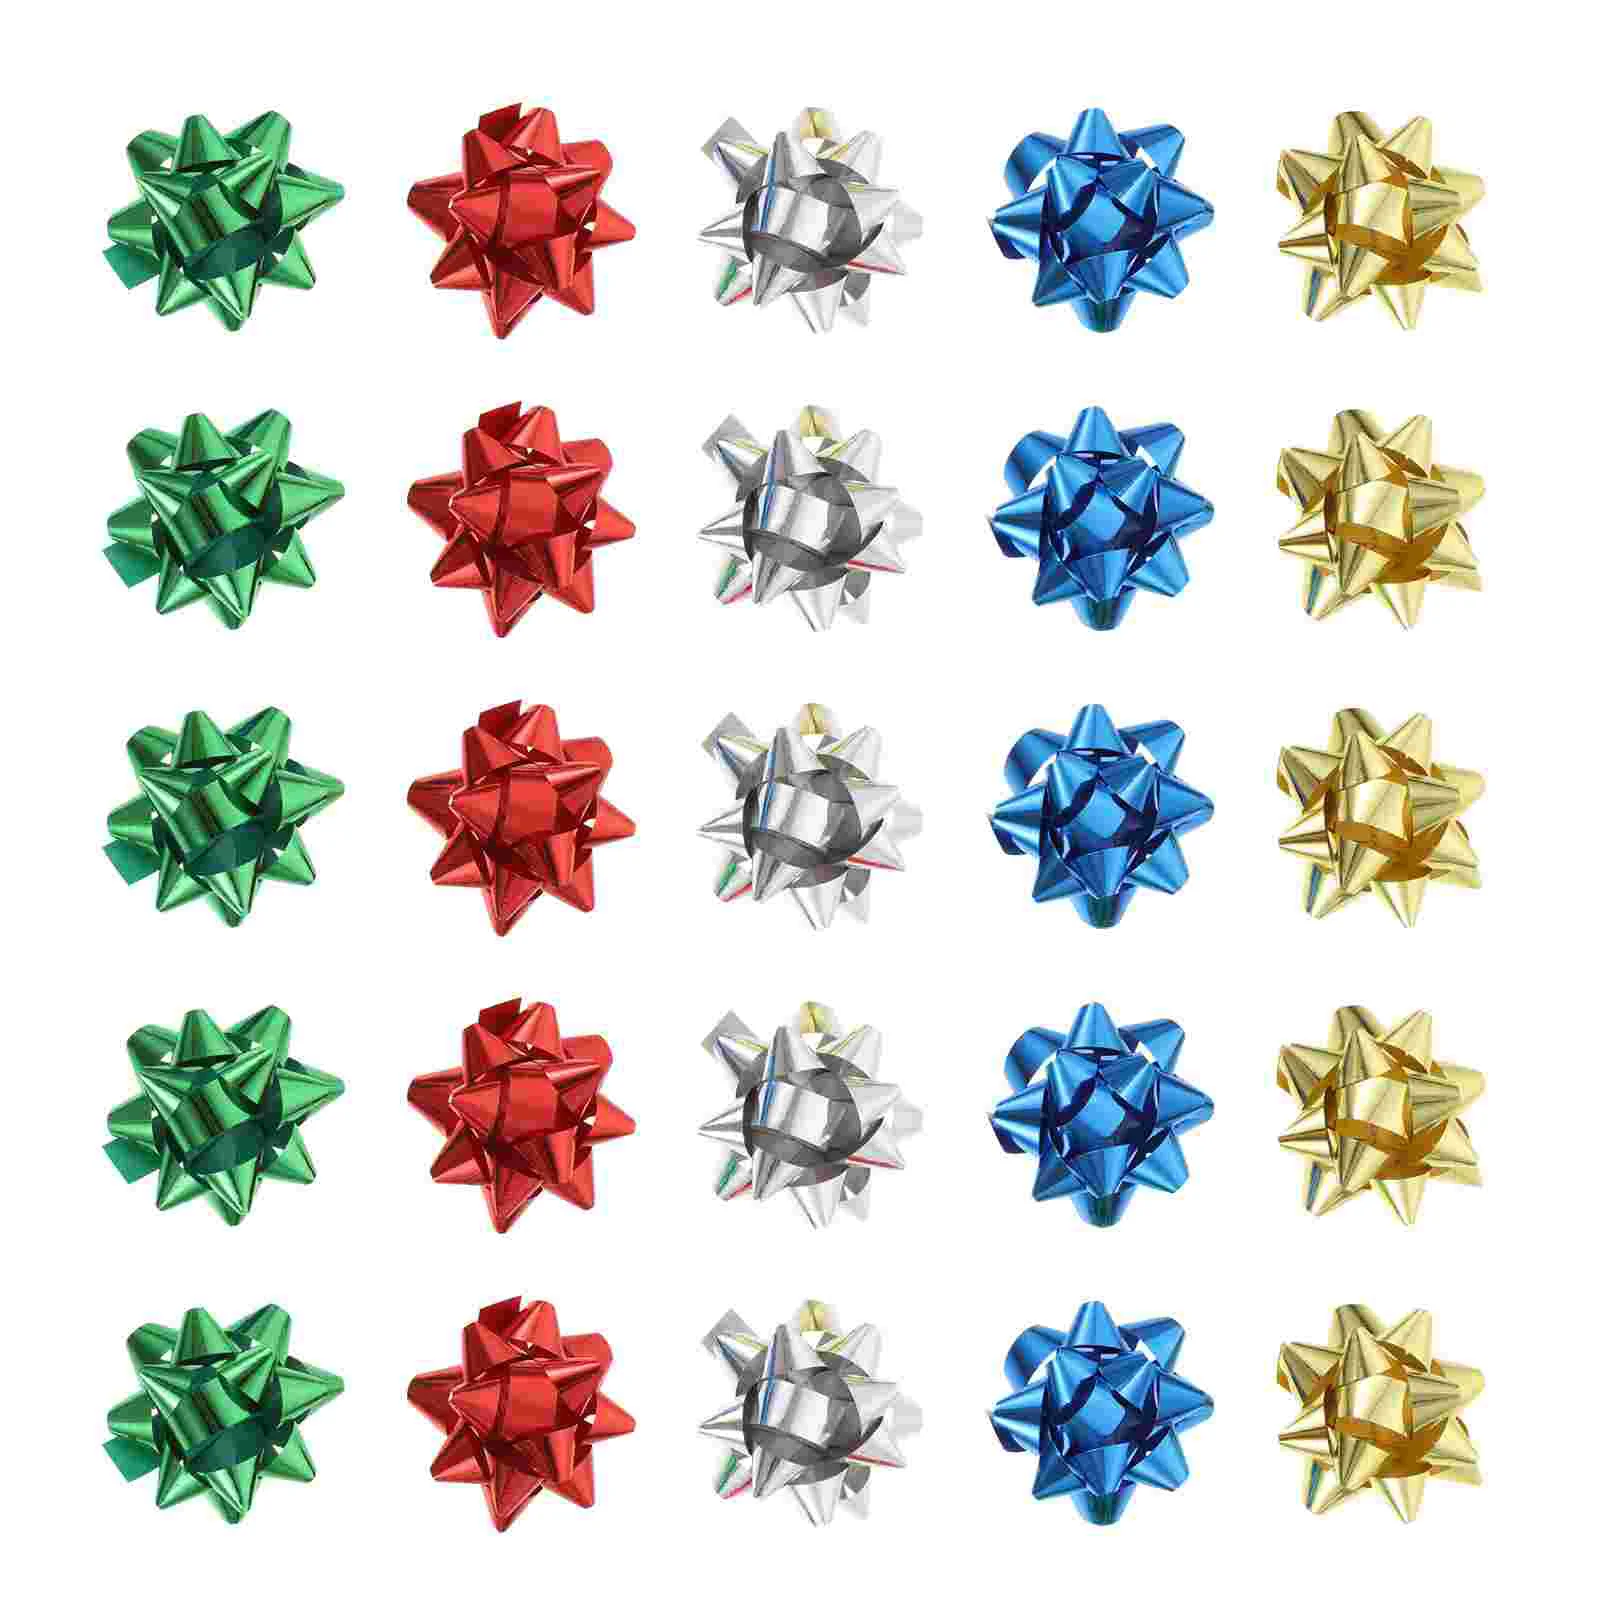 

Bows Christmas Giftbowwrapping Flower Ribbon Decorative Flowers Wrap Set Tree Diy Assortment Colorful Ornaments Boxes Presents